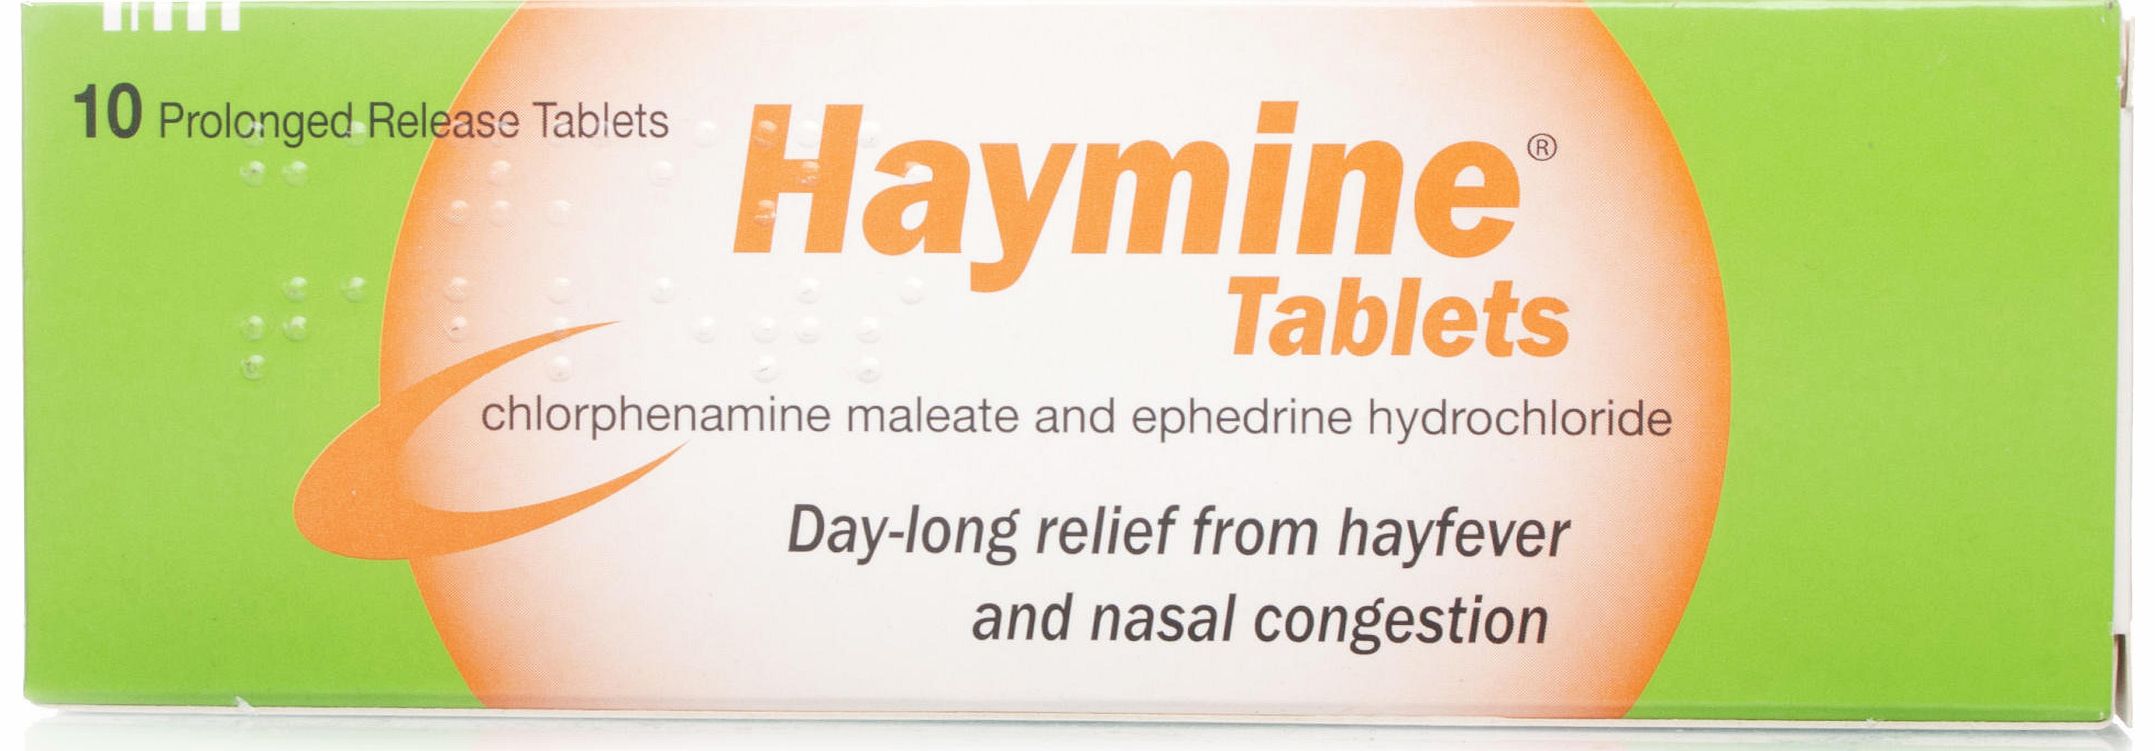 Haymine Tablets - Designed to last all day long Haymine tablets are for the relief of hayfever and nasal congestion , and allergies. They contain active medicinal ingredients and can alleviate symptoms such as coughing, itching, sneezing and dry eyes